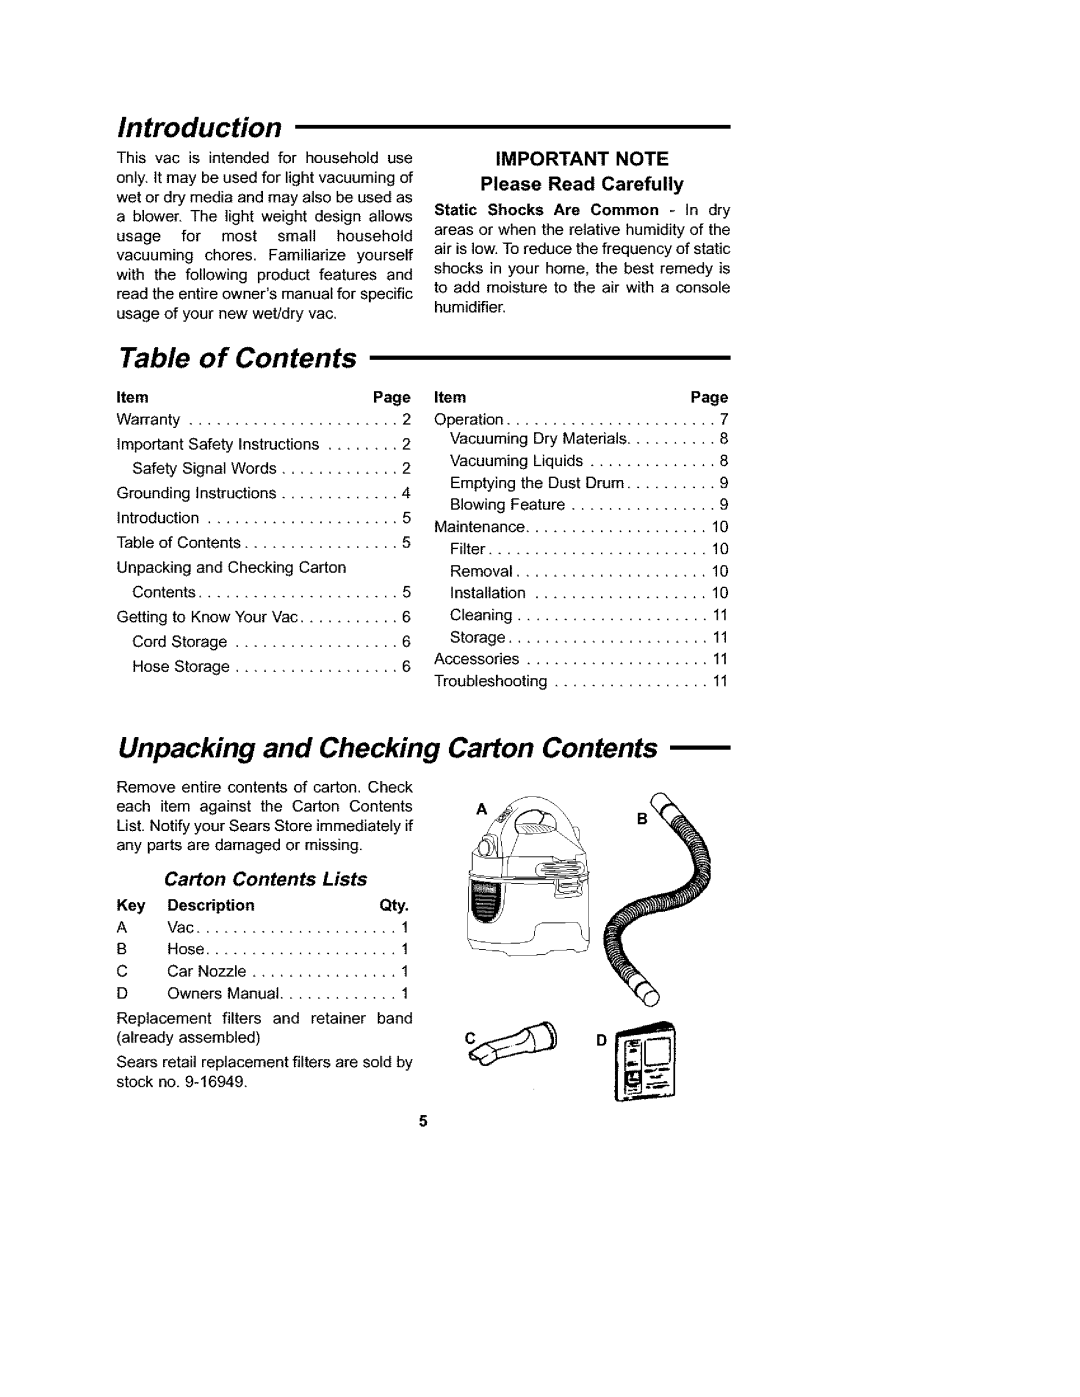 Craftsman 113.177135 owner manual Introduction, of Contents, Unpacking and Checking Carton Contents 